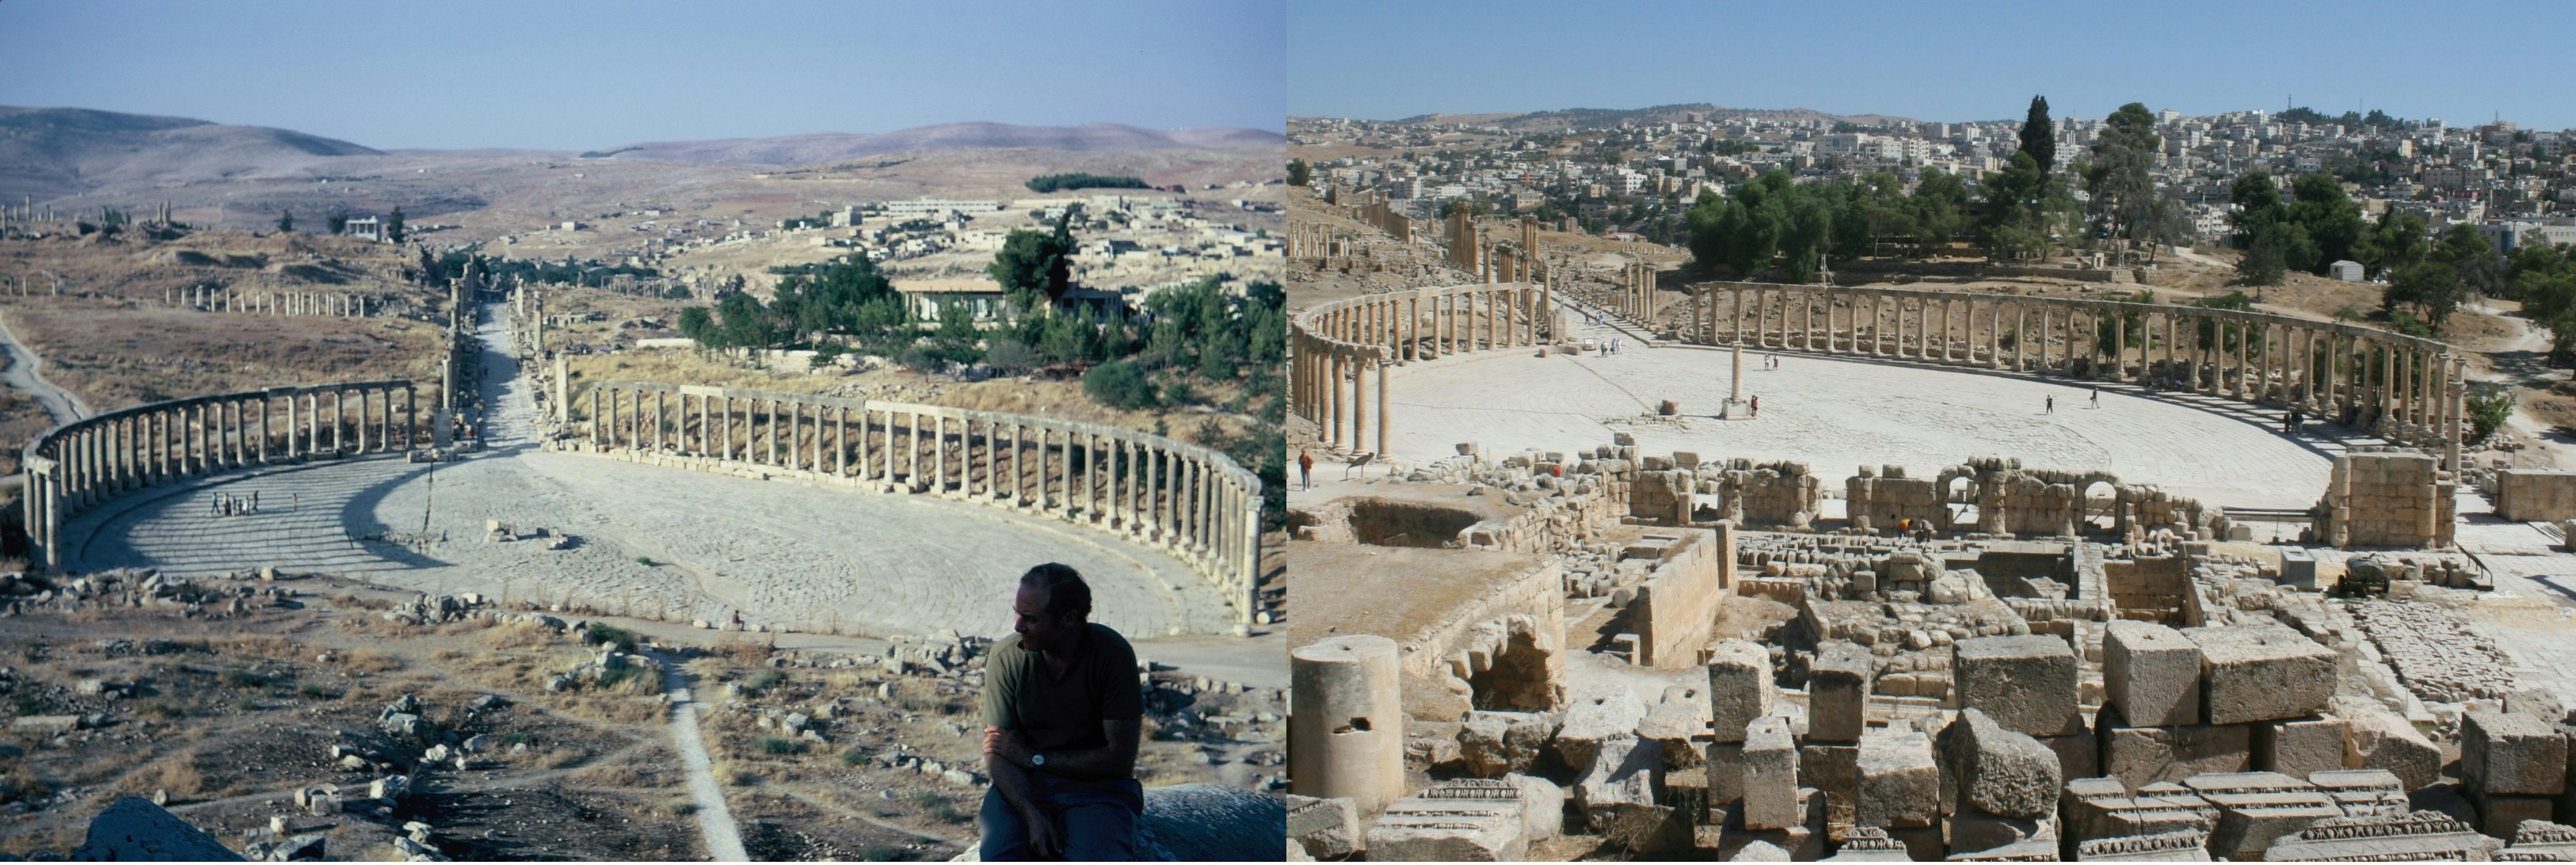 Two side-by-side images, one of the Roman Ruins of Jerash in 1972, the other of it in 2019; both are remarkably similar, with a circle of stone pillars, but the hills in the background are now covered in development.